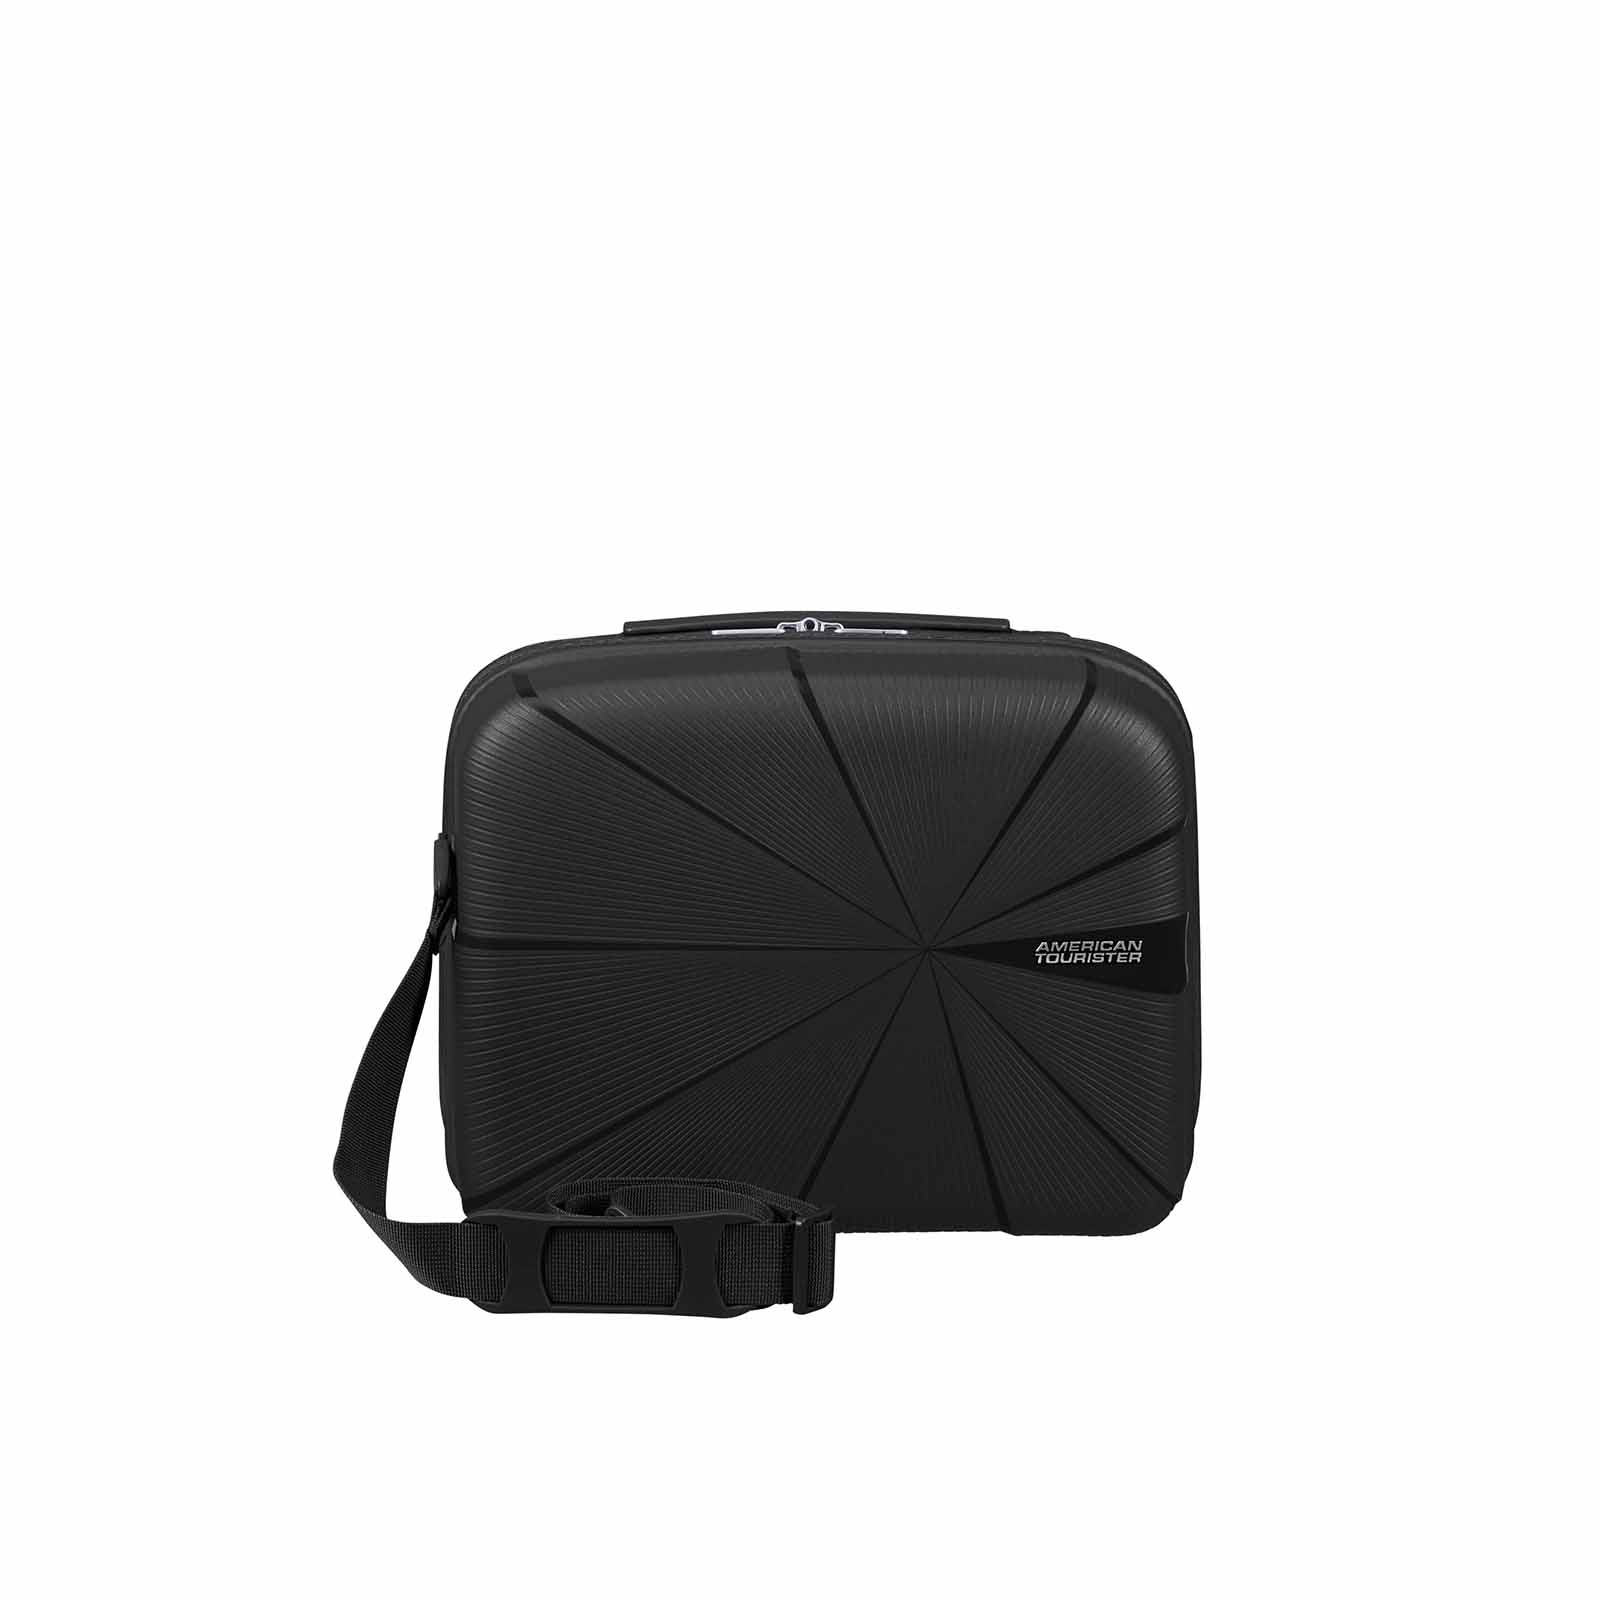 American-Tourister-Starvibe-Beauty-Case-Black-Front